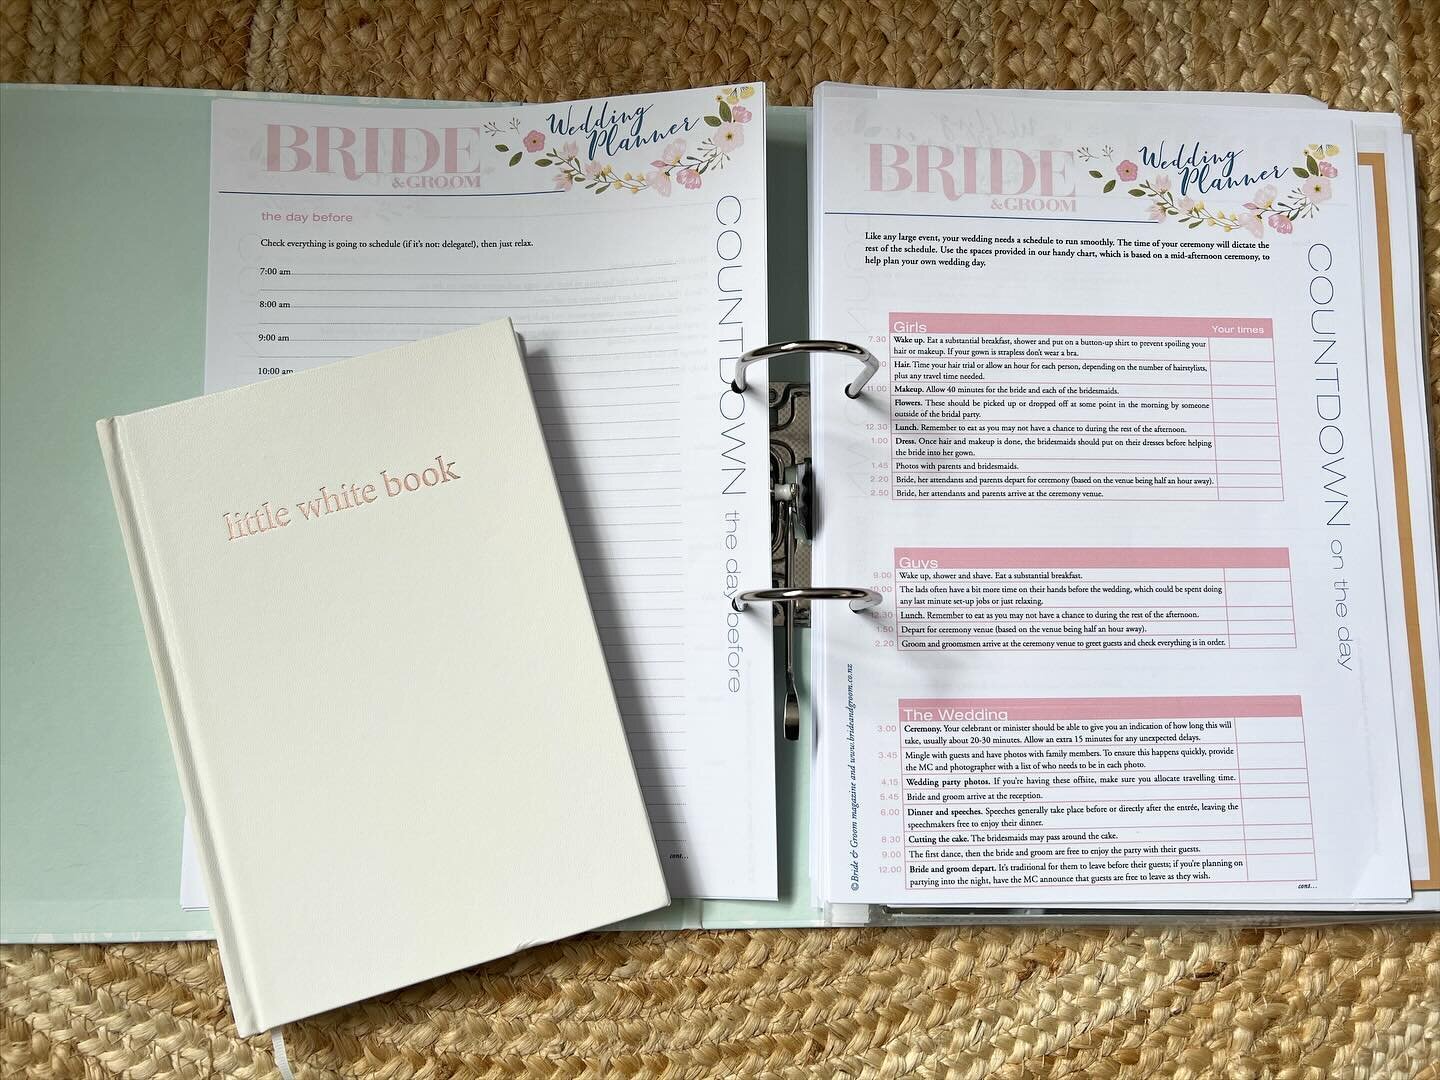 Wedding Tip #2 💍

Get organised! Being organised right at the very beginning will help in the long run. Get yourself a wedding planner book or create a folder just for wedding planning so that you have a place for all things wedding. For electronic 